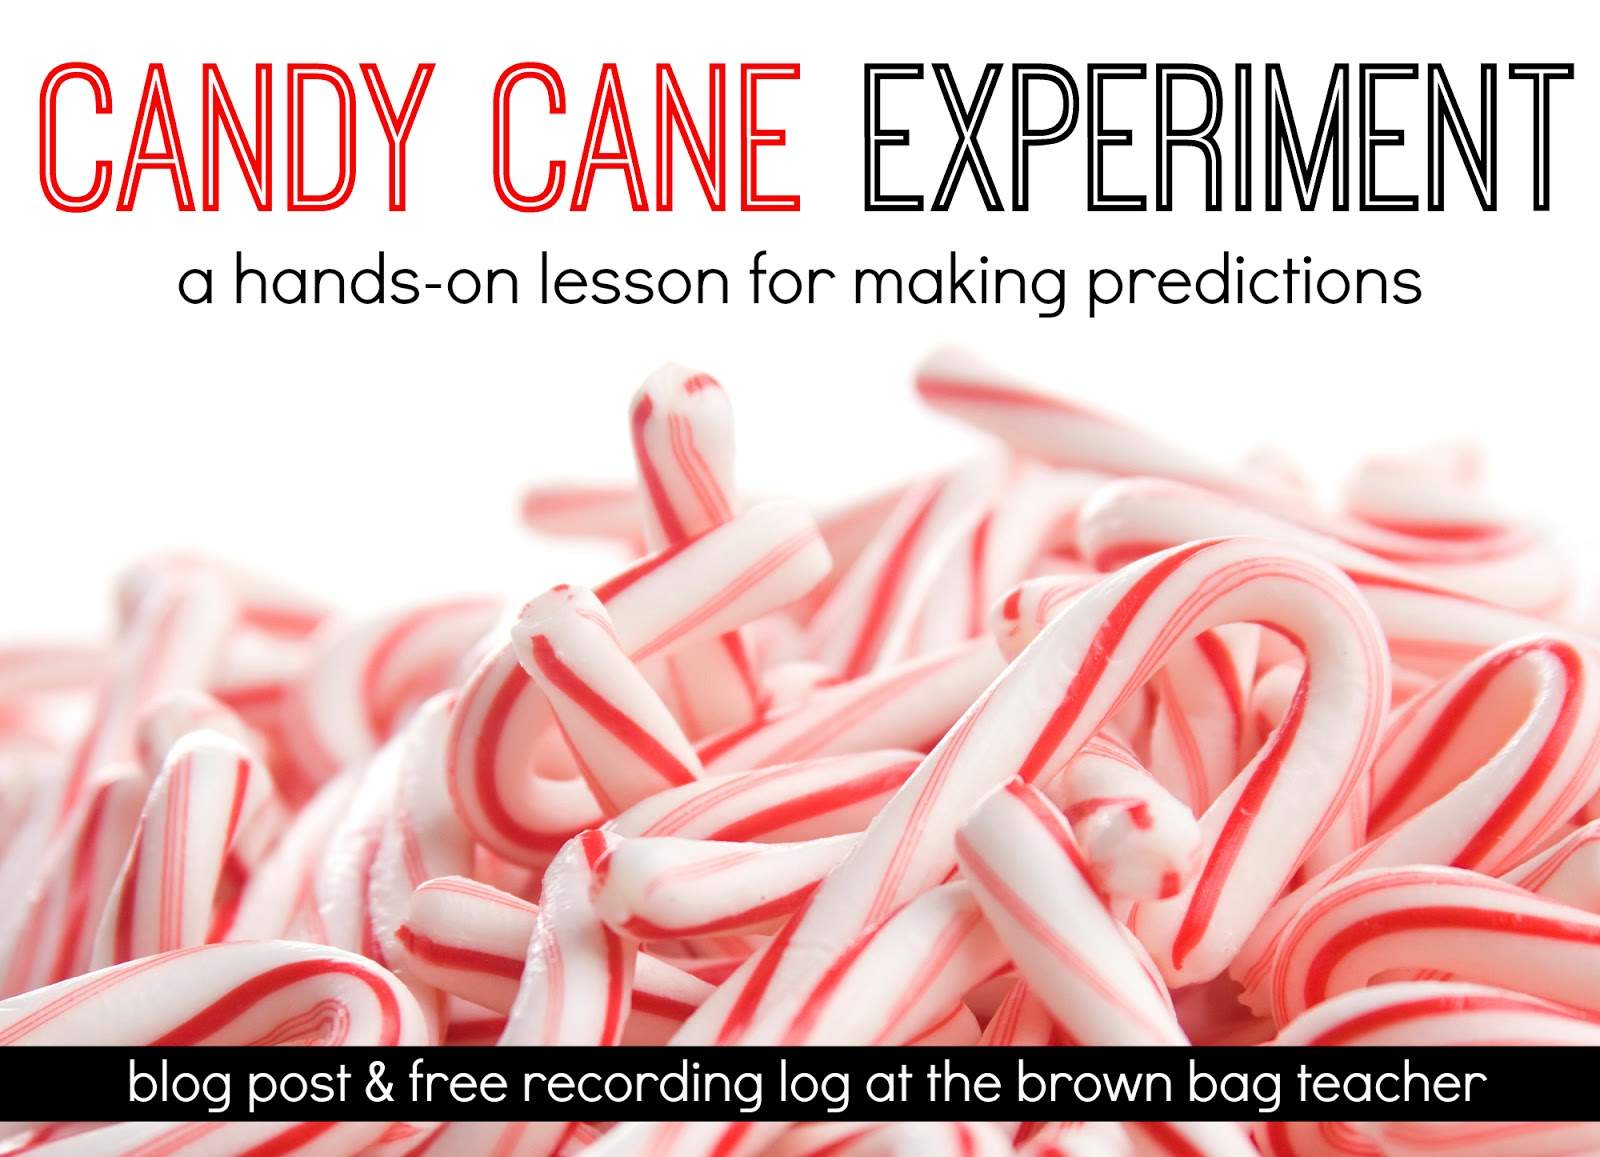 Candy Cane Experiment image